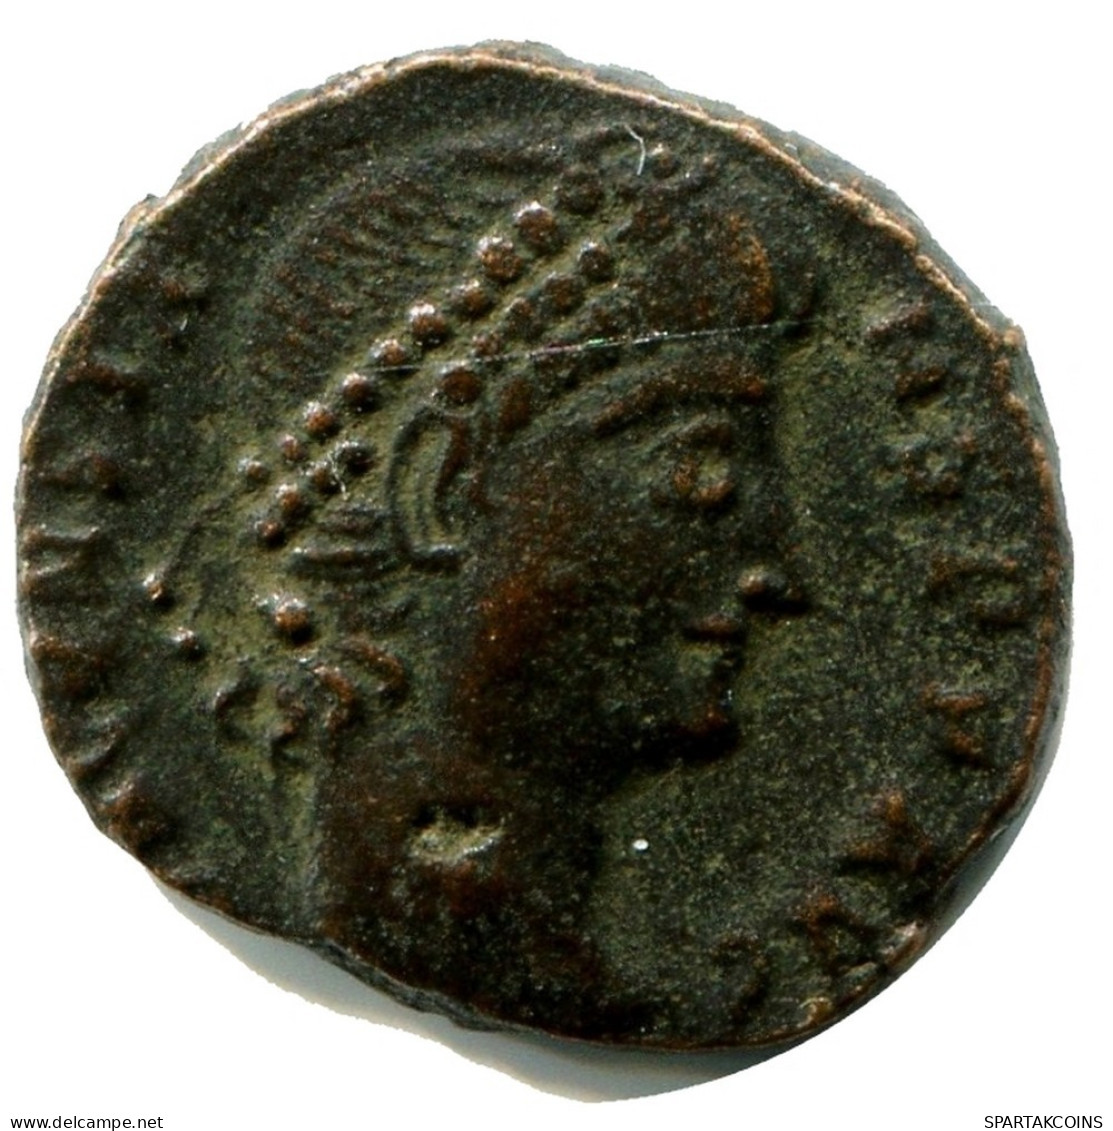 CONSTANS MINTED IN ANTIOCH FOUND IN IHNASYAH HOARD EGYPT #ANC11857.14.E.A - El Impero Christiano (307 / 363)